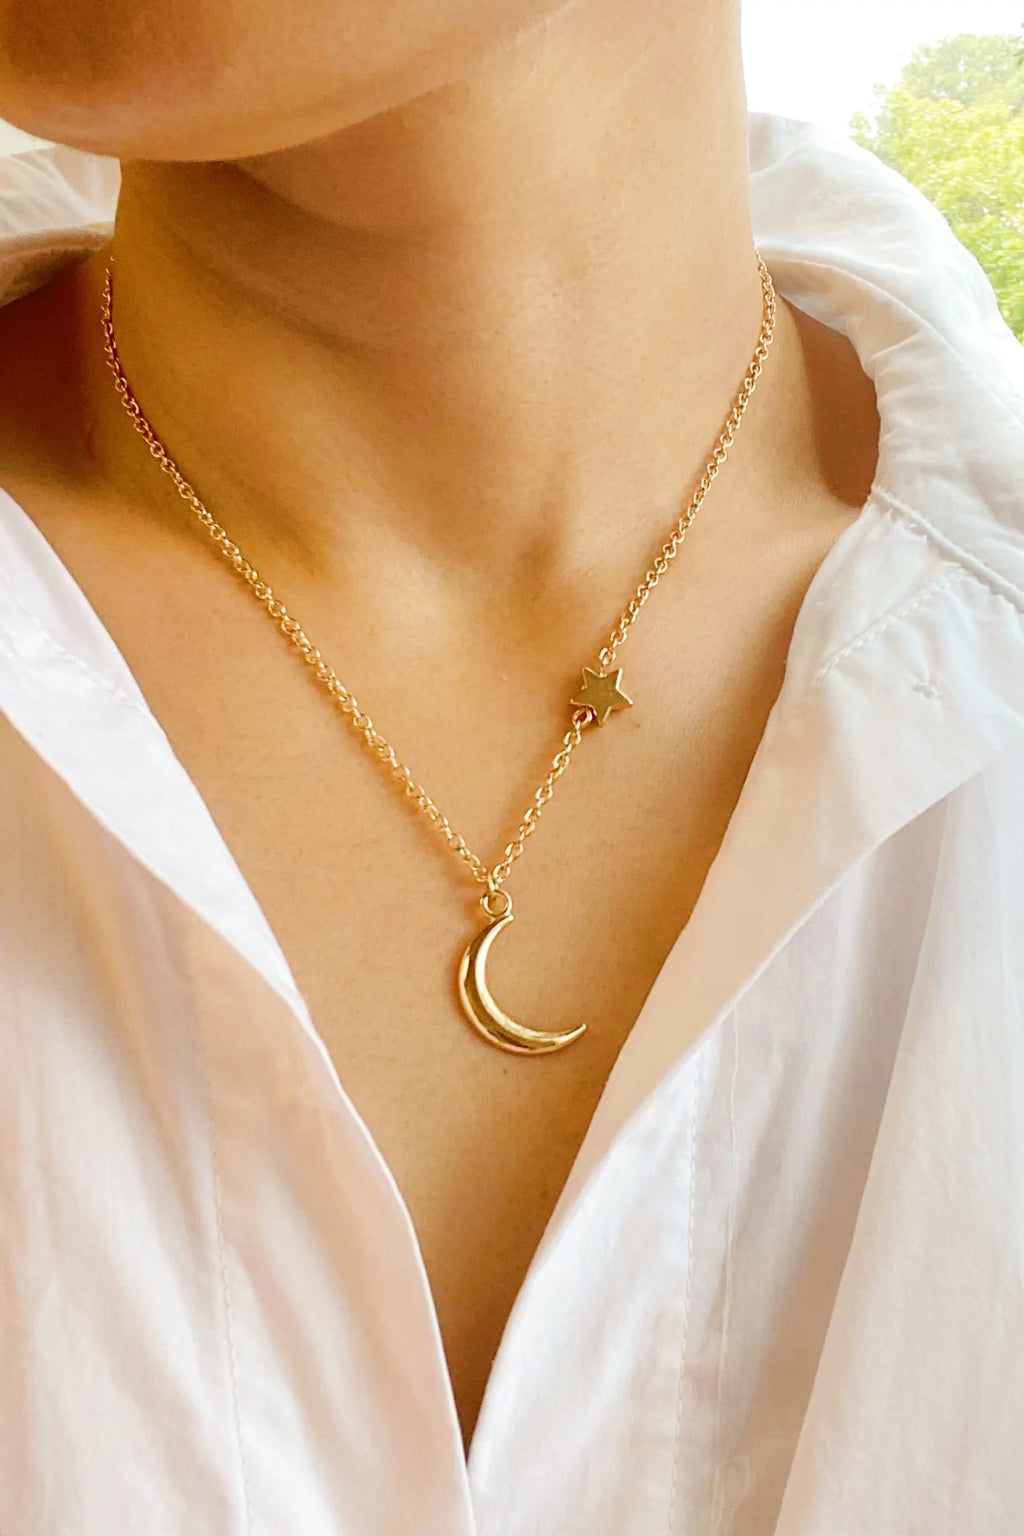 NEW MOON NECKLACE